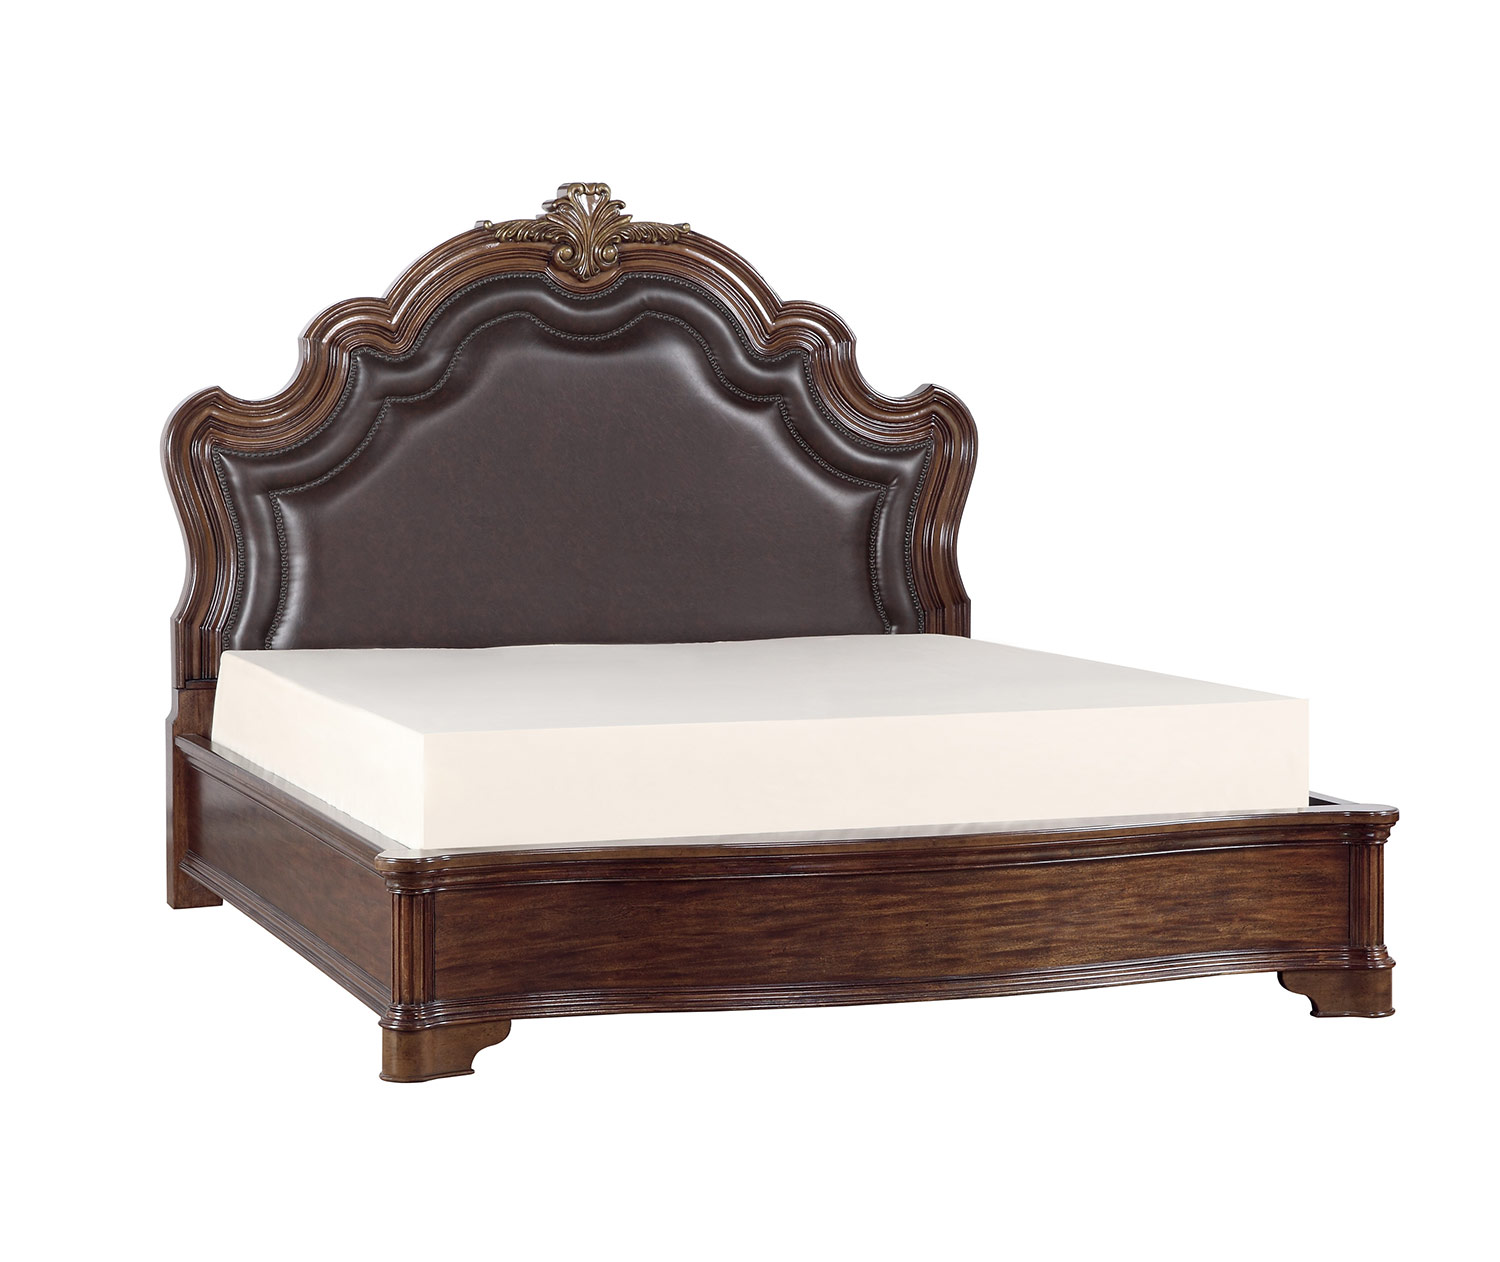 Homelegance Barbary Bed - Traditional Cherry